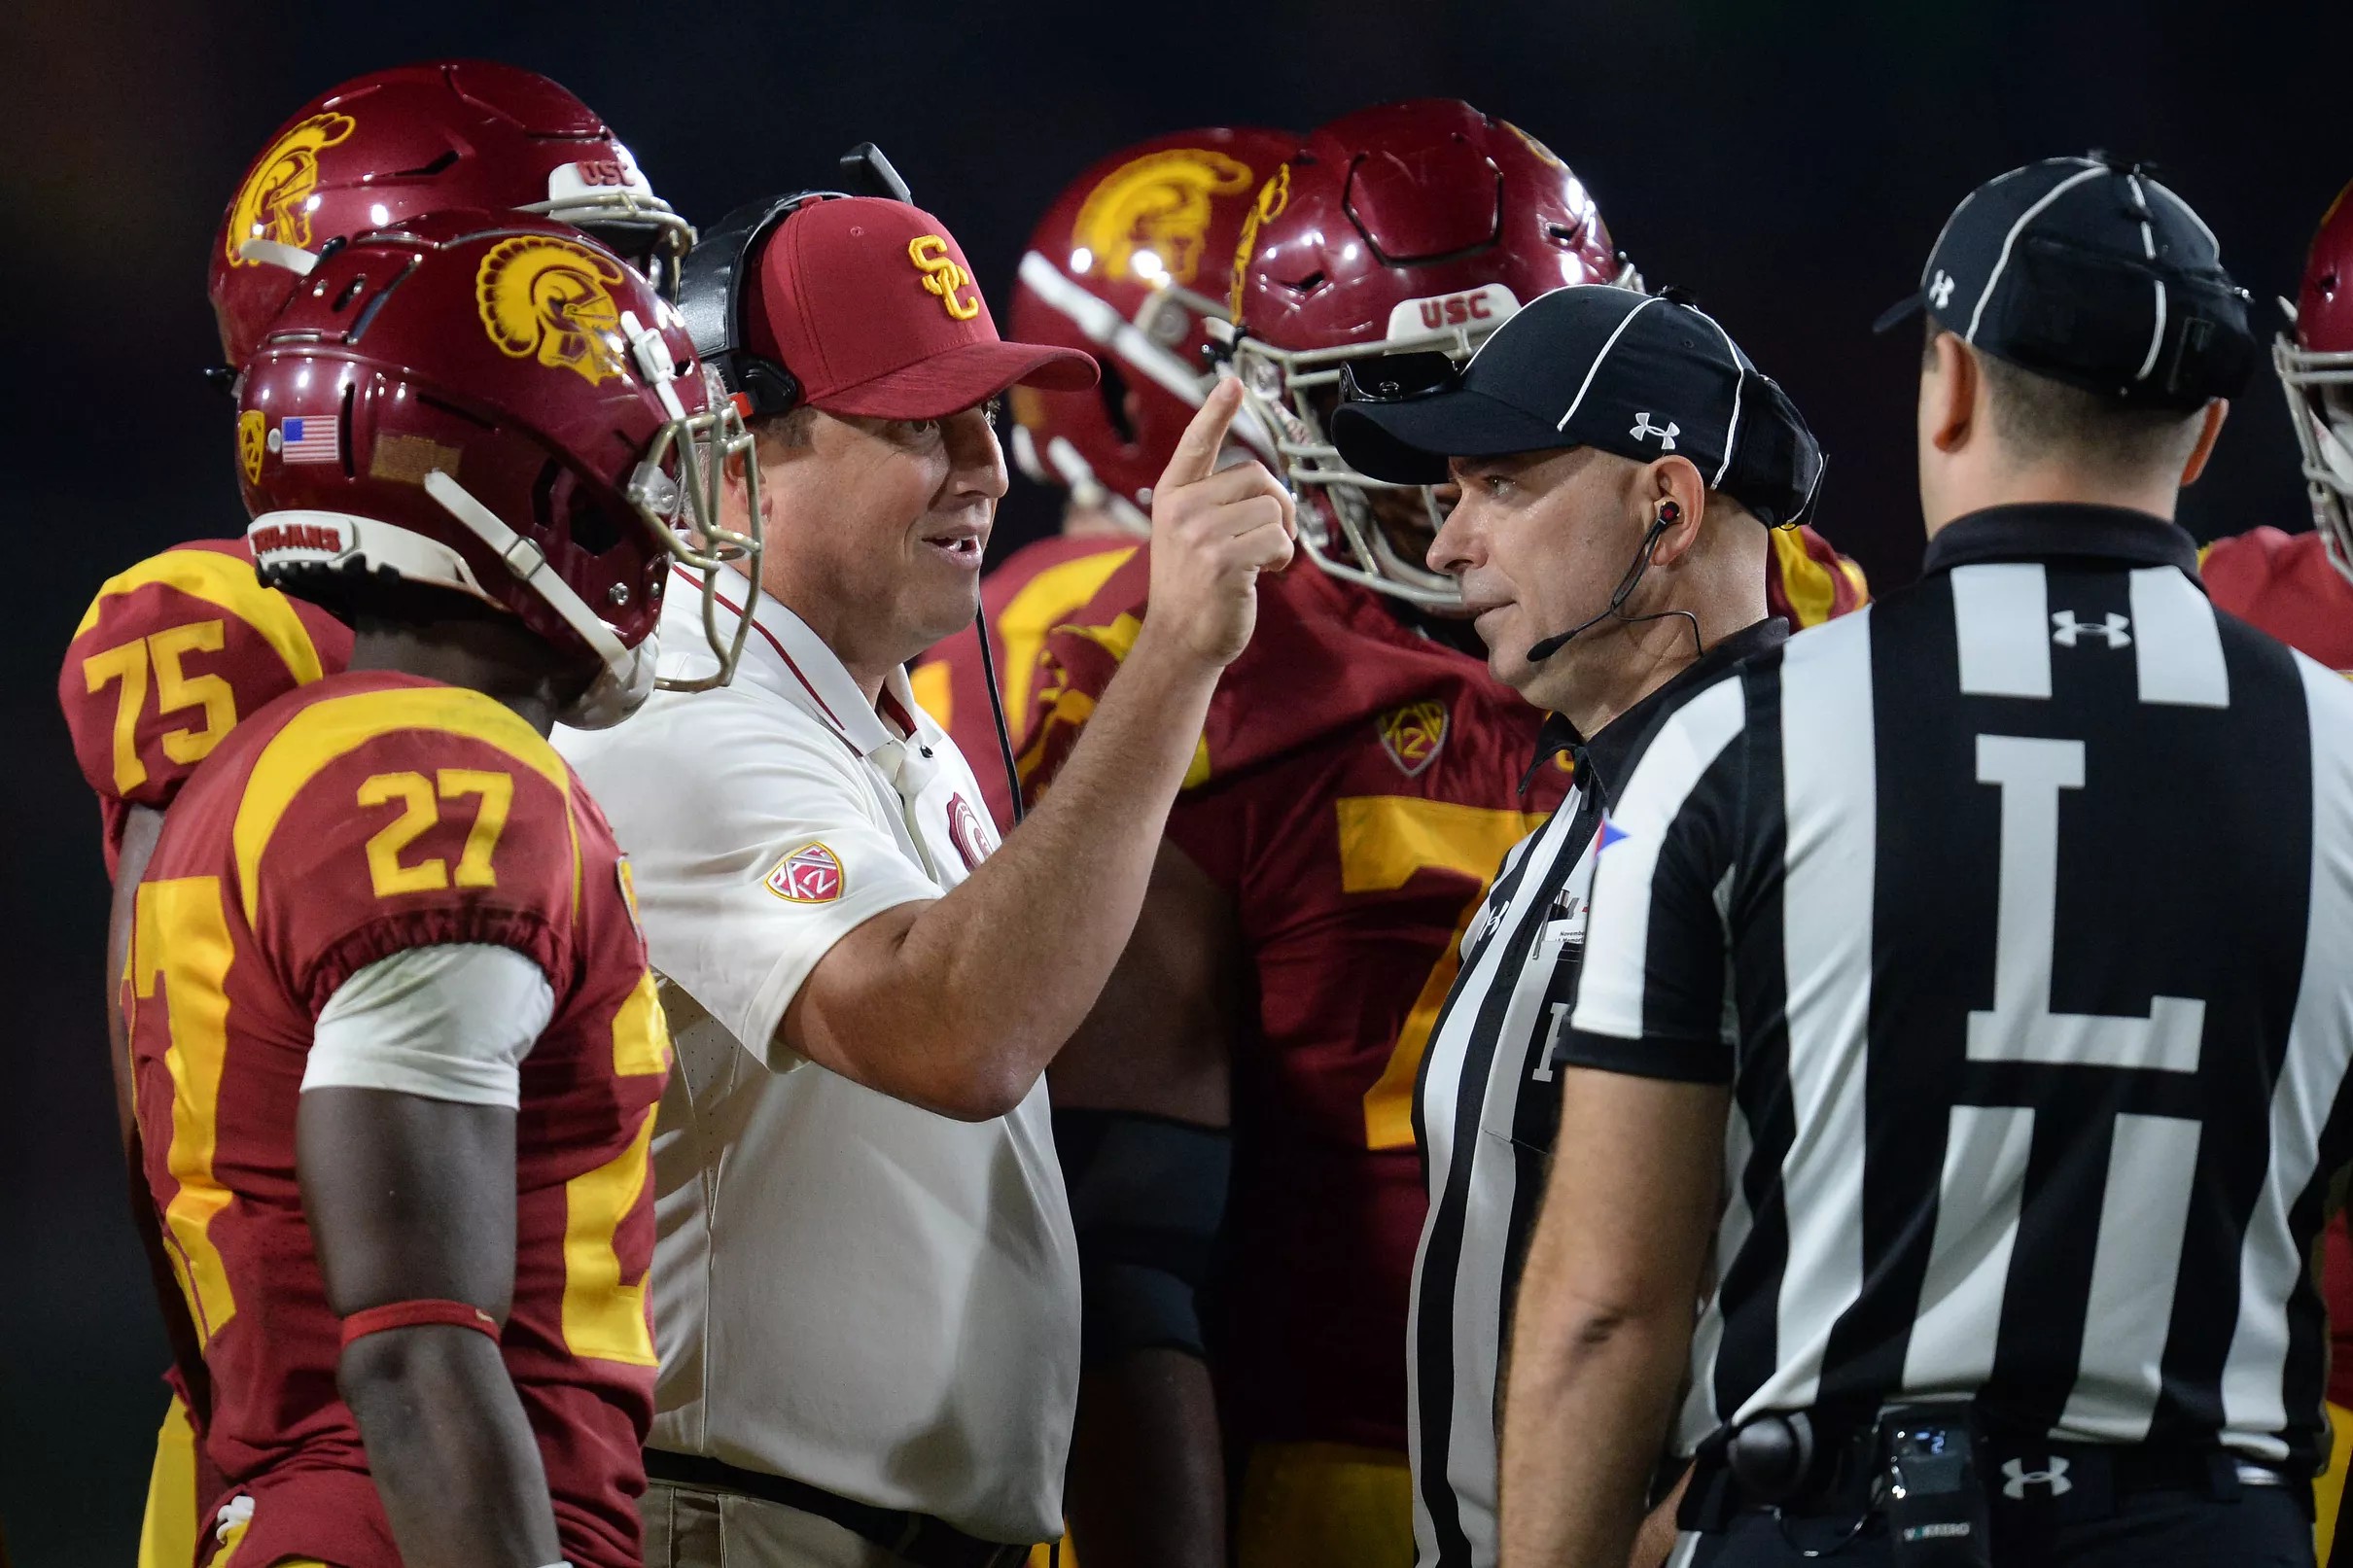 USC Football Recruiting 3 Star Safety Briton Allen commits to the Trojans